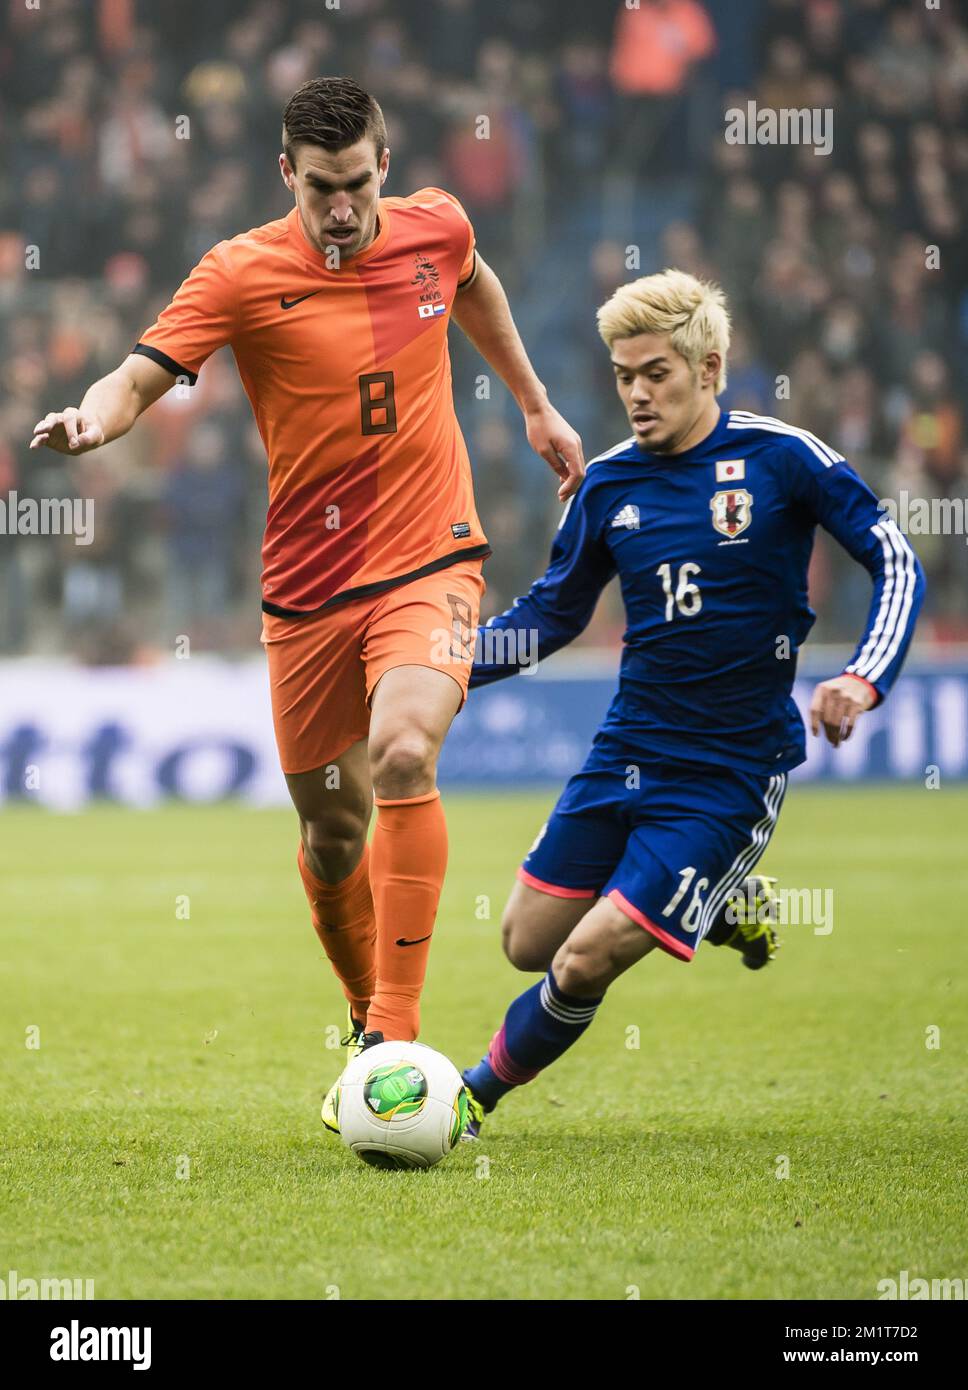 20131116 - GENK, BELGIUM: Dutch Kevin Strootman and Japan's Hotaru Yamaguchi fight for the ball during a friendly soccer game between the Netherlands and Japan, in Genk on Saturday 16 November 2013. BELGA PHOTO NICOLAS LAMBERT Stock Photo